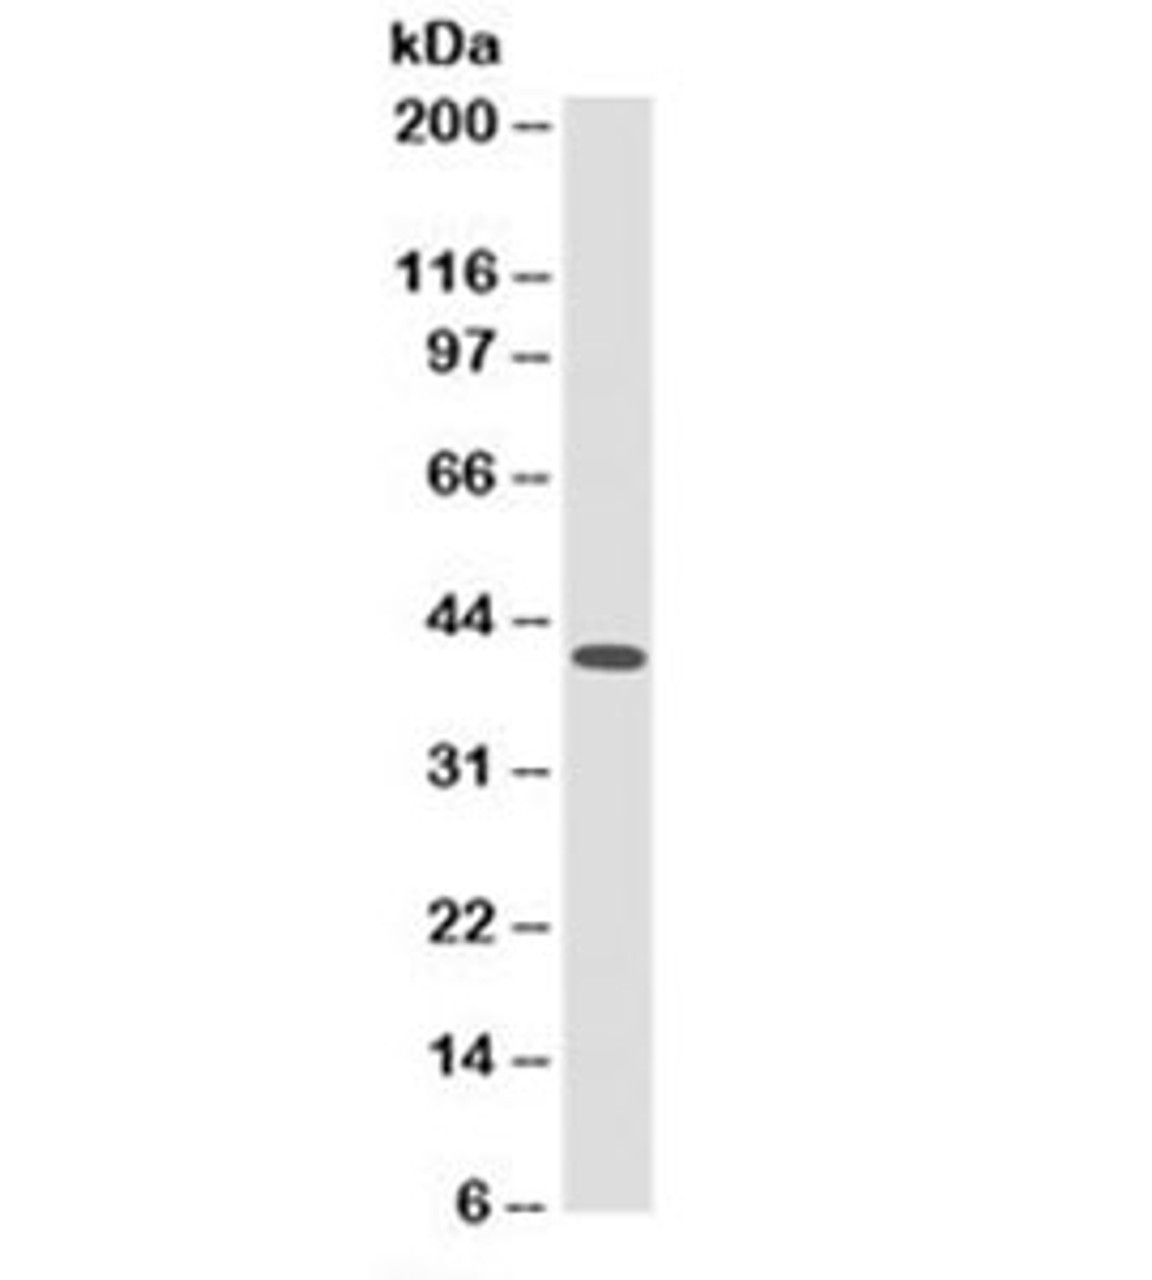 Western blot testing of ThP-1 cell lysate with HLA-ABC antibody. Expected molecular weight of A/B/C: 40-41kDa.